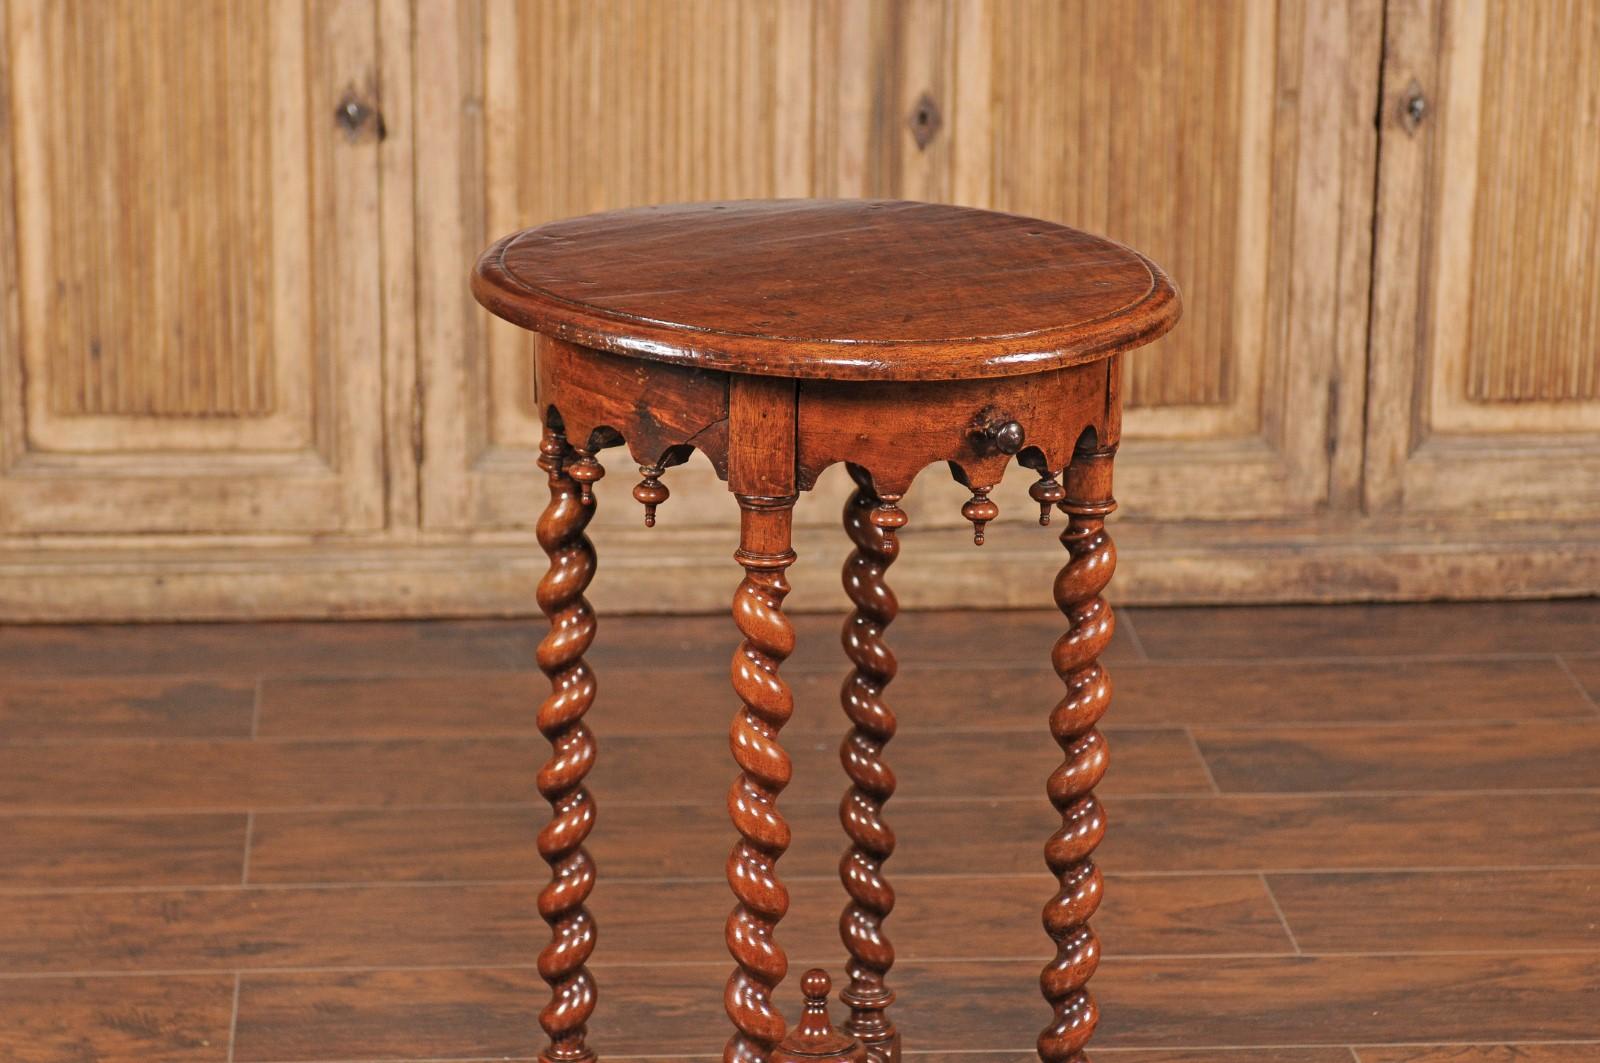 A French walnut Louis XIII style guéridon side table from the late 19th century, with single drawer and barley twist legs. Born in France at the end of Emperor Napoleon III's reign, this exquisite guéridon features a circular top sitting above a